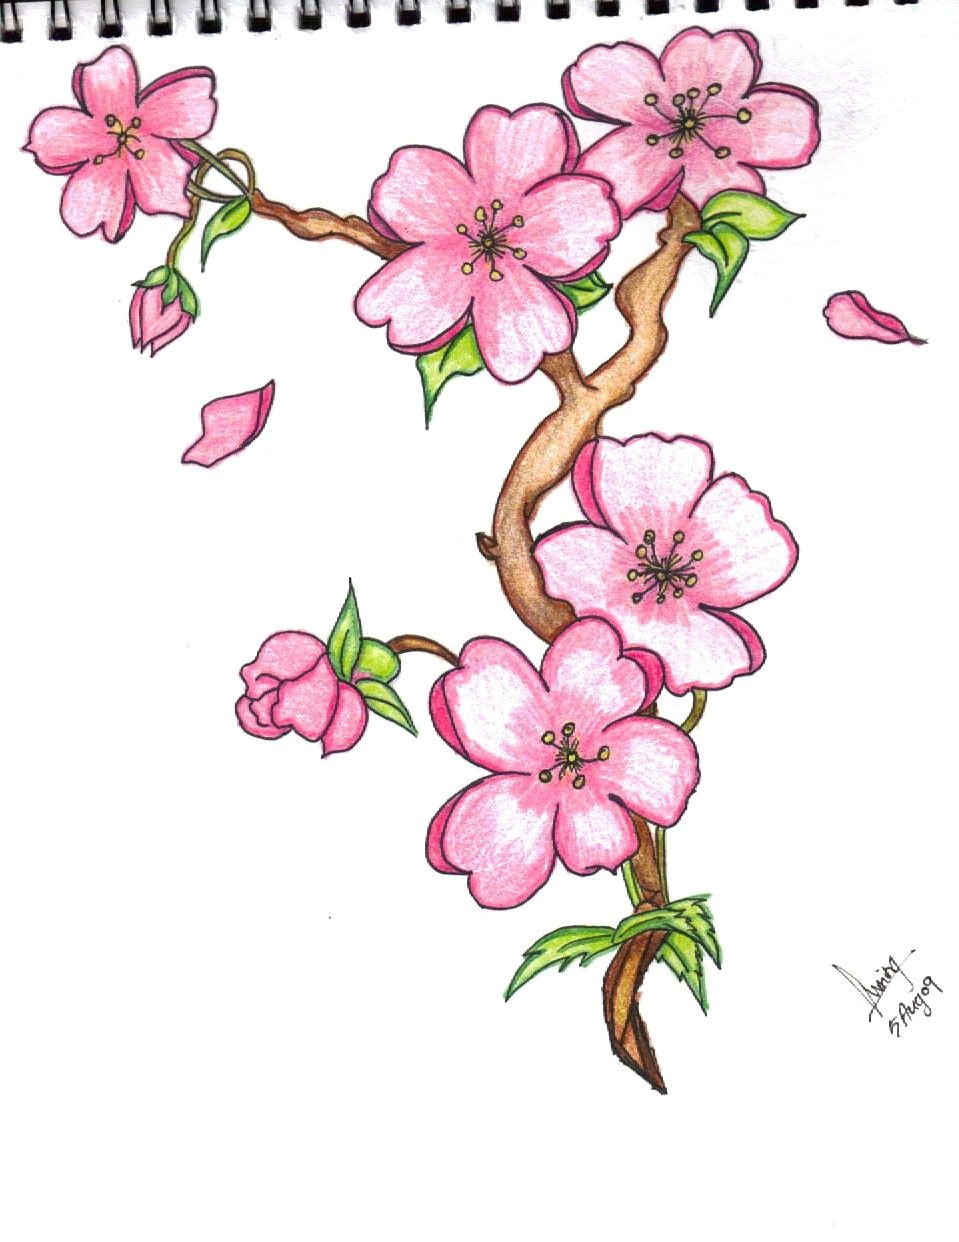 Easy Nature Drawings with Color Pin by Marvin todd On Drawing Flowers In 2019 Pinterest Drawings